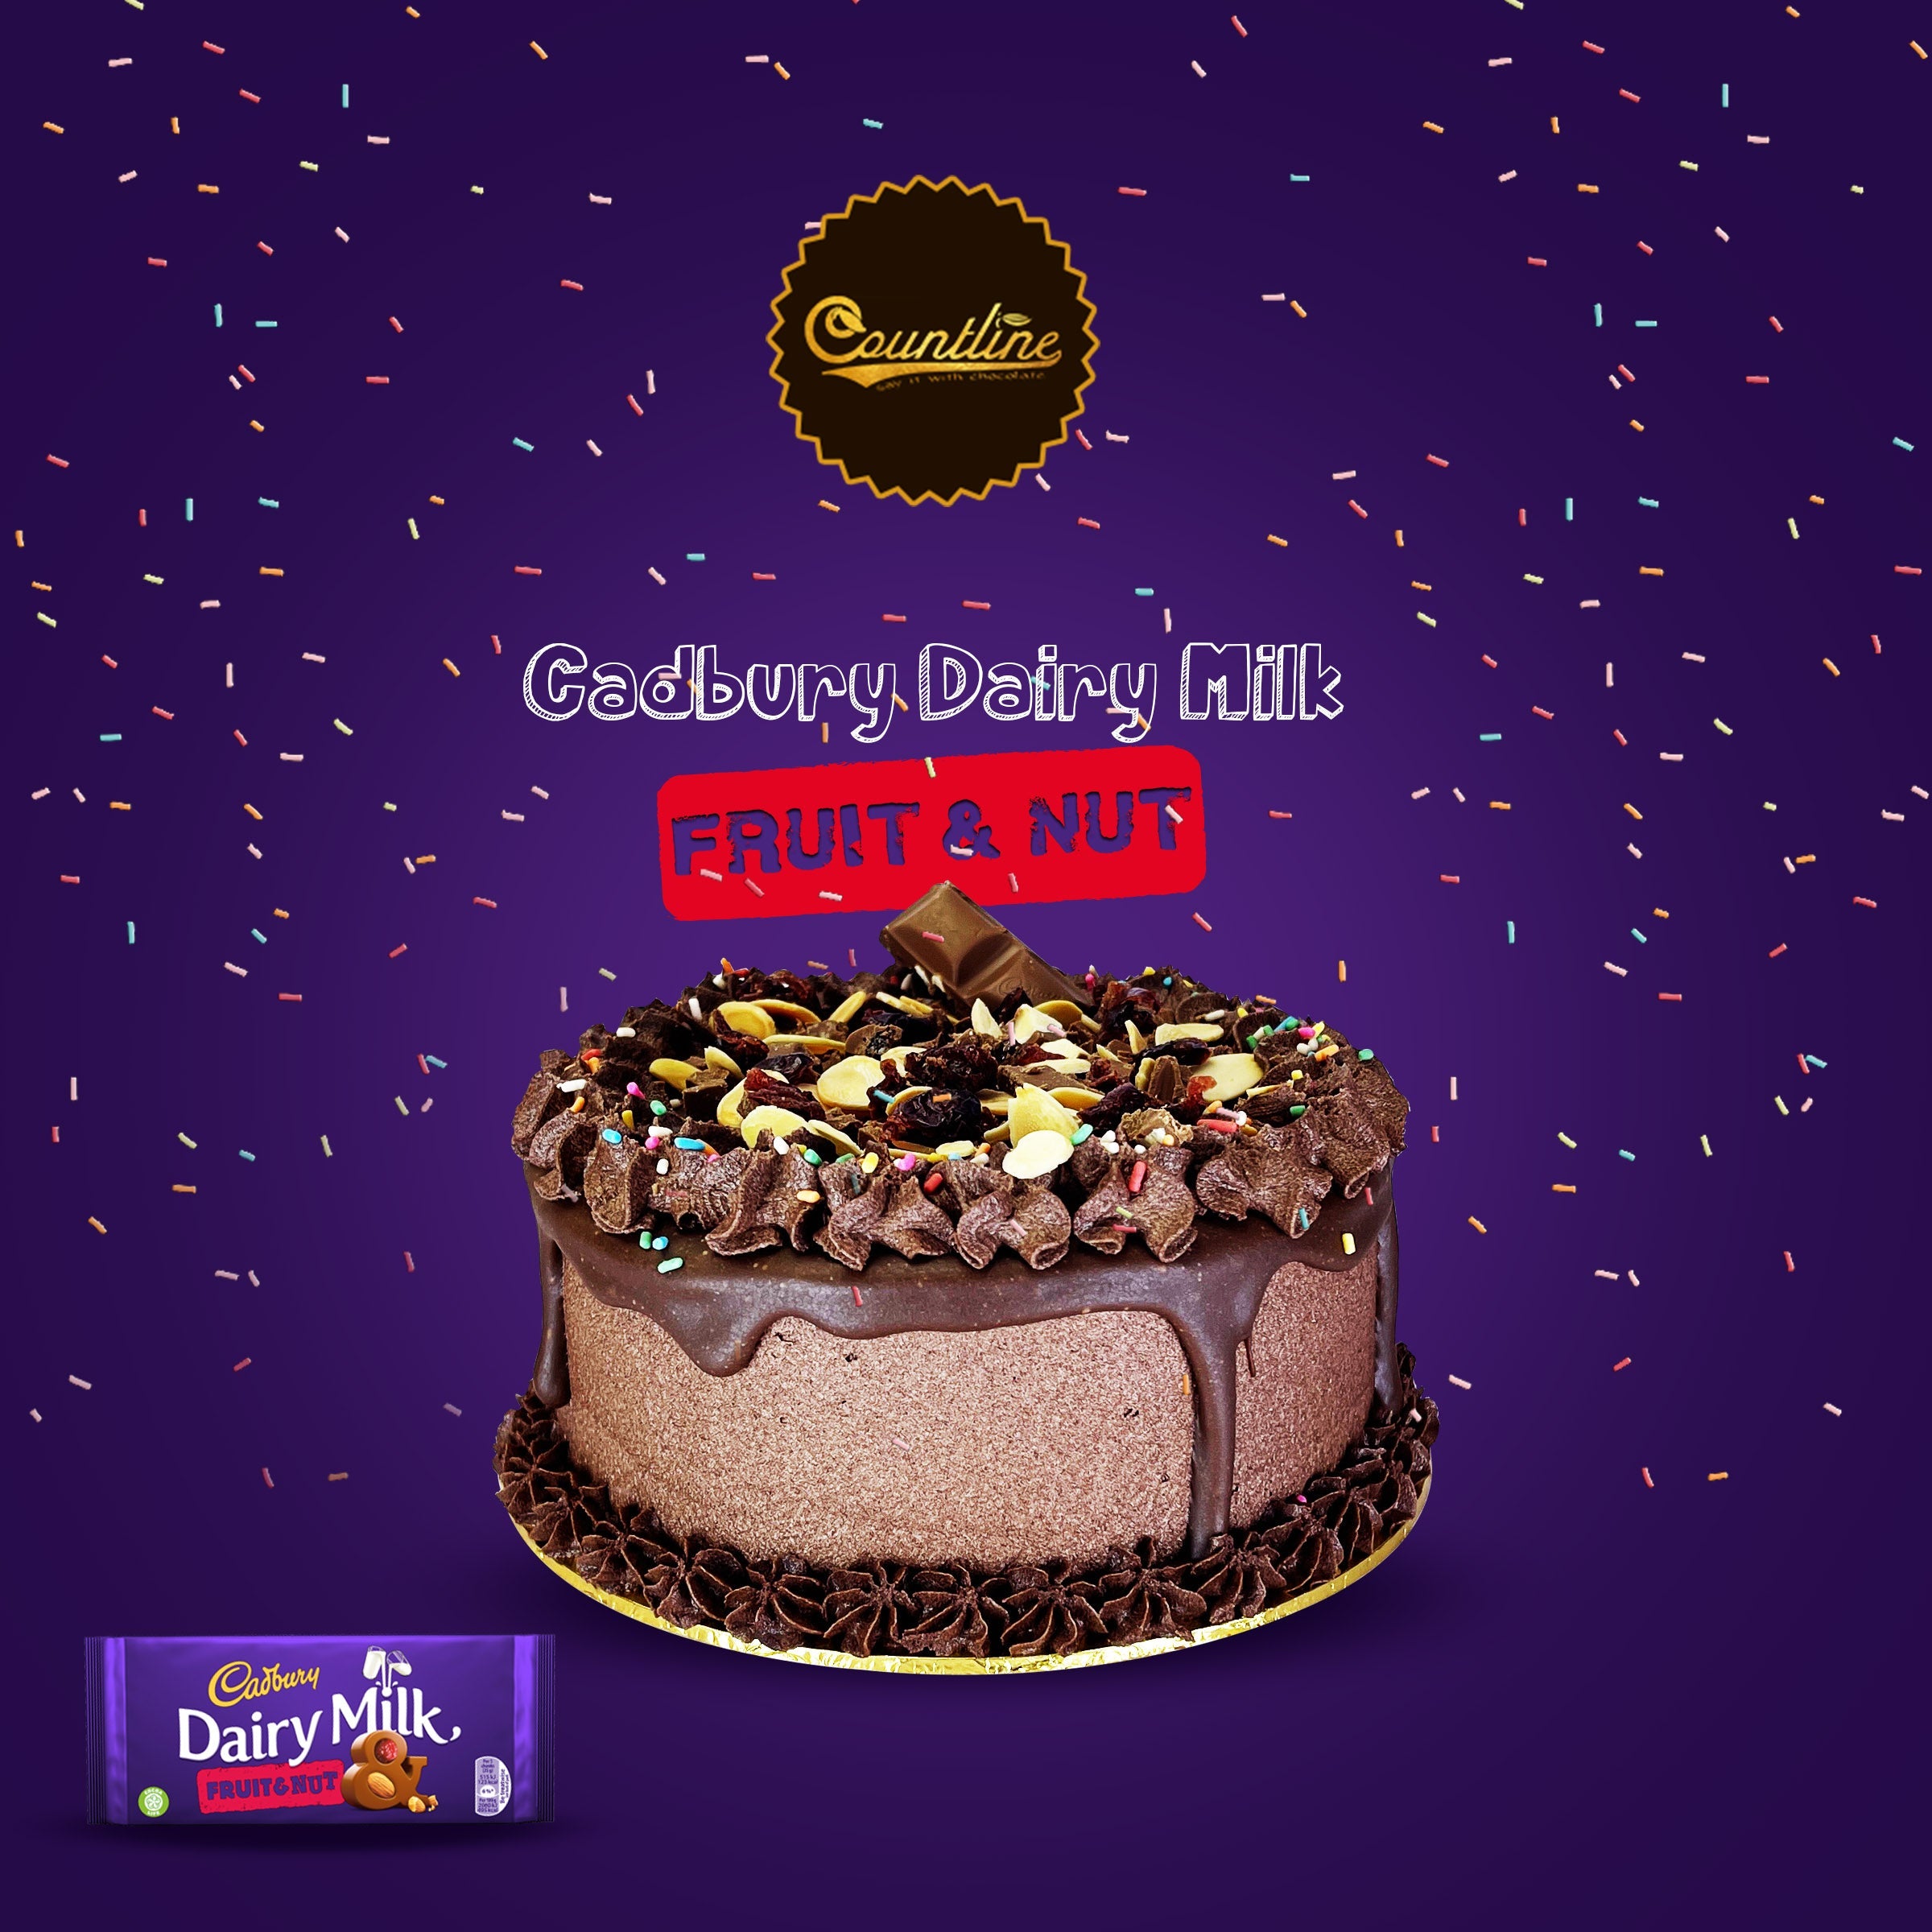 Dairy Milk Chocolate Bar Cake - Buy Online, Free UK Delivery — New Cakes